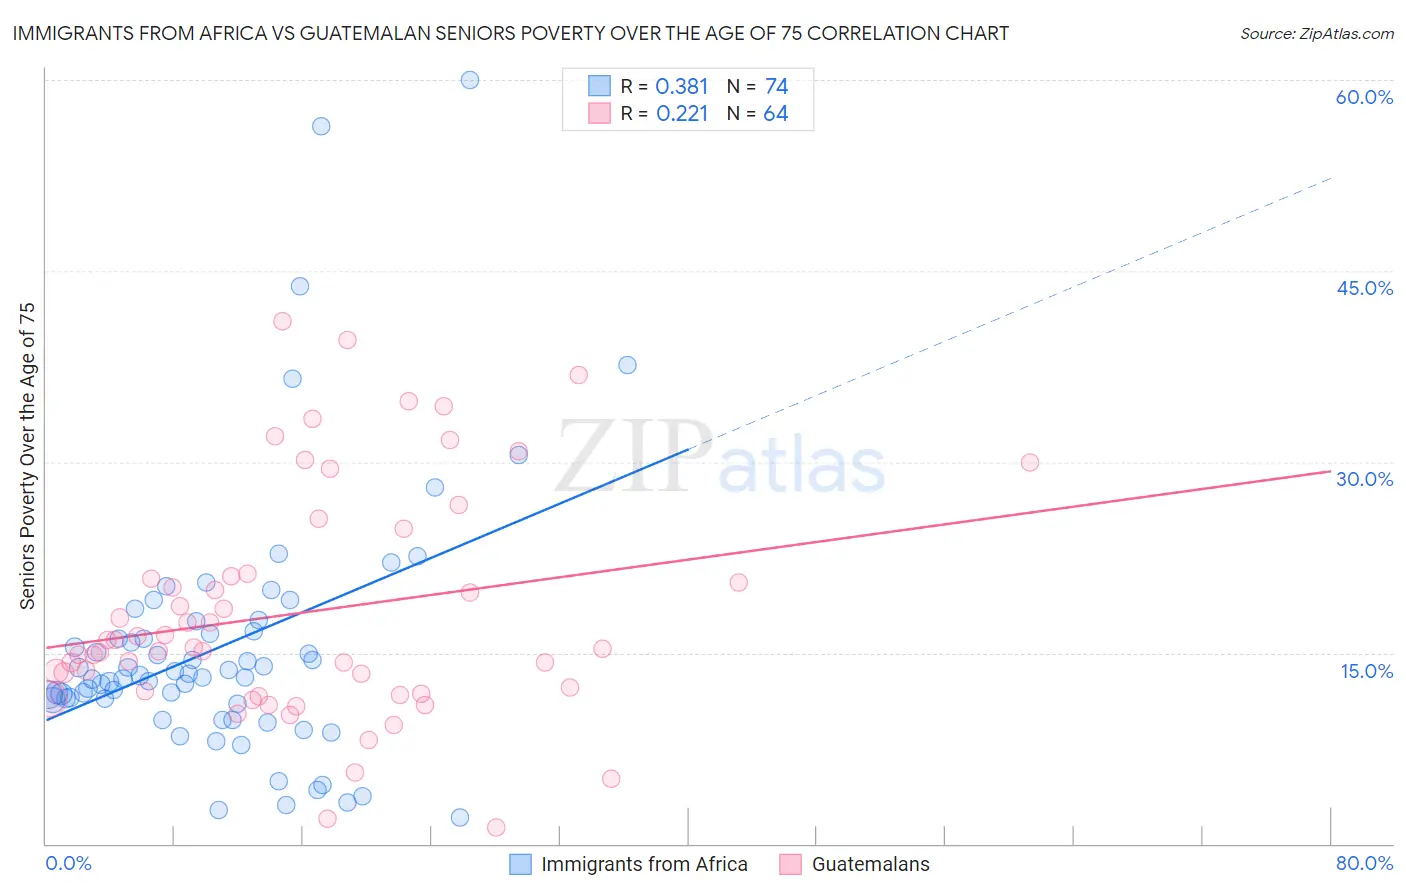 Immigrants from Africa vs Guatemalan Seniors Poverty Over the Age of 75